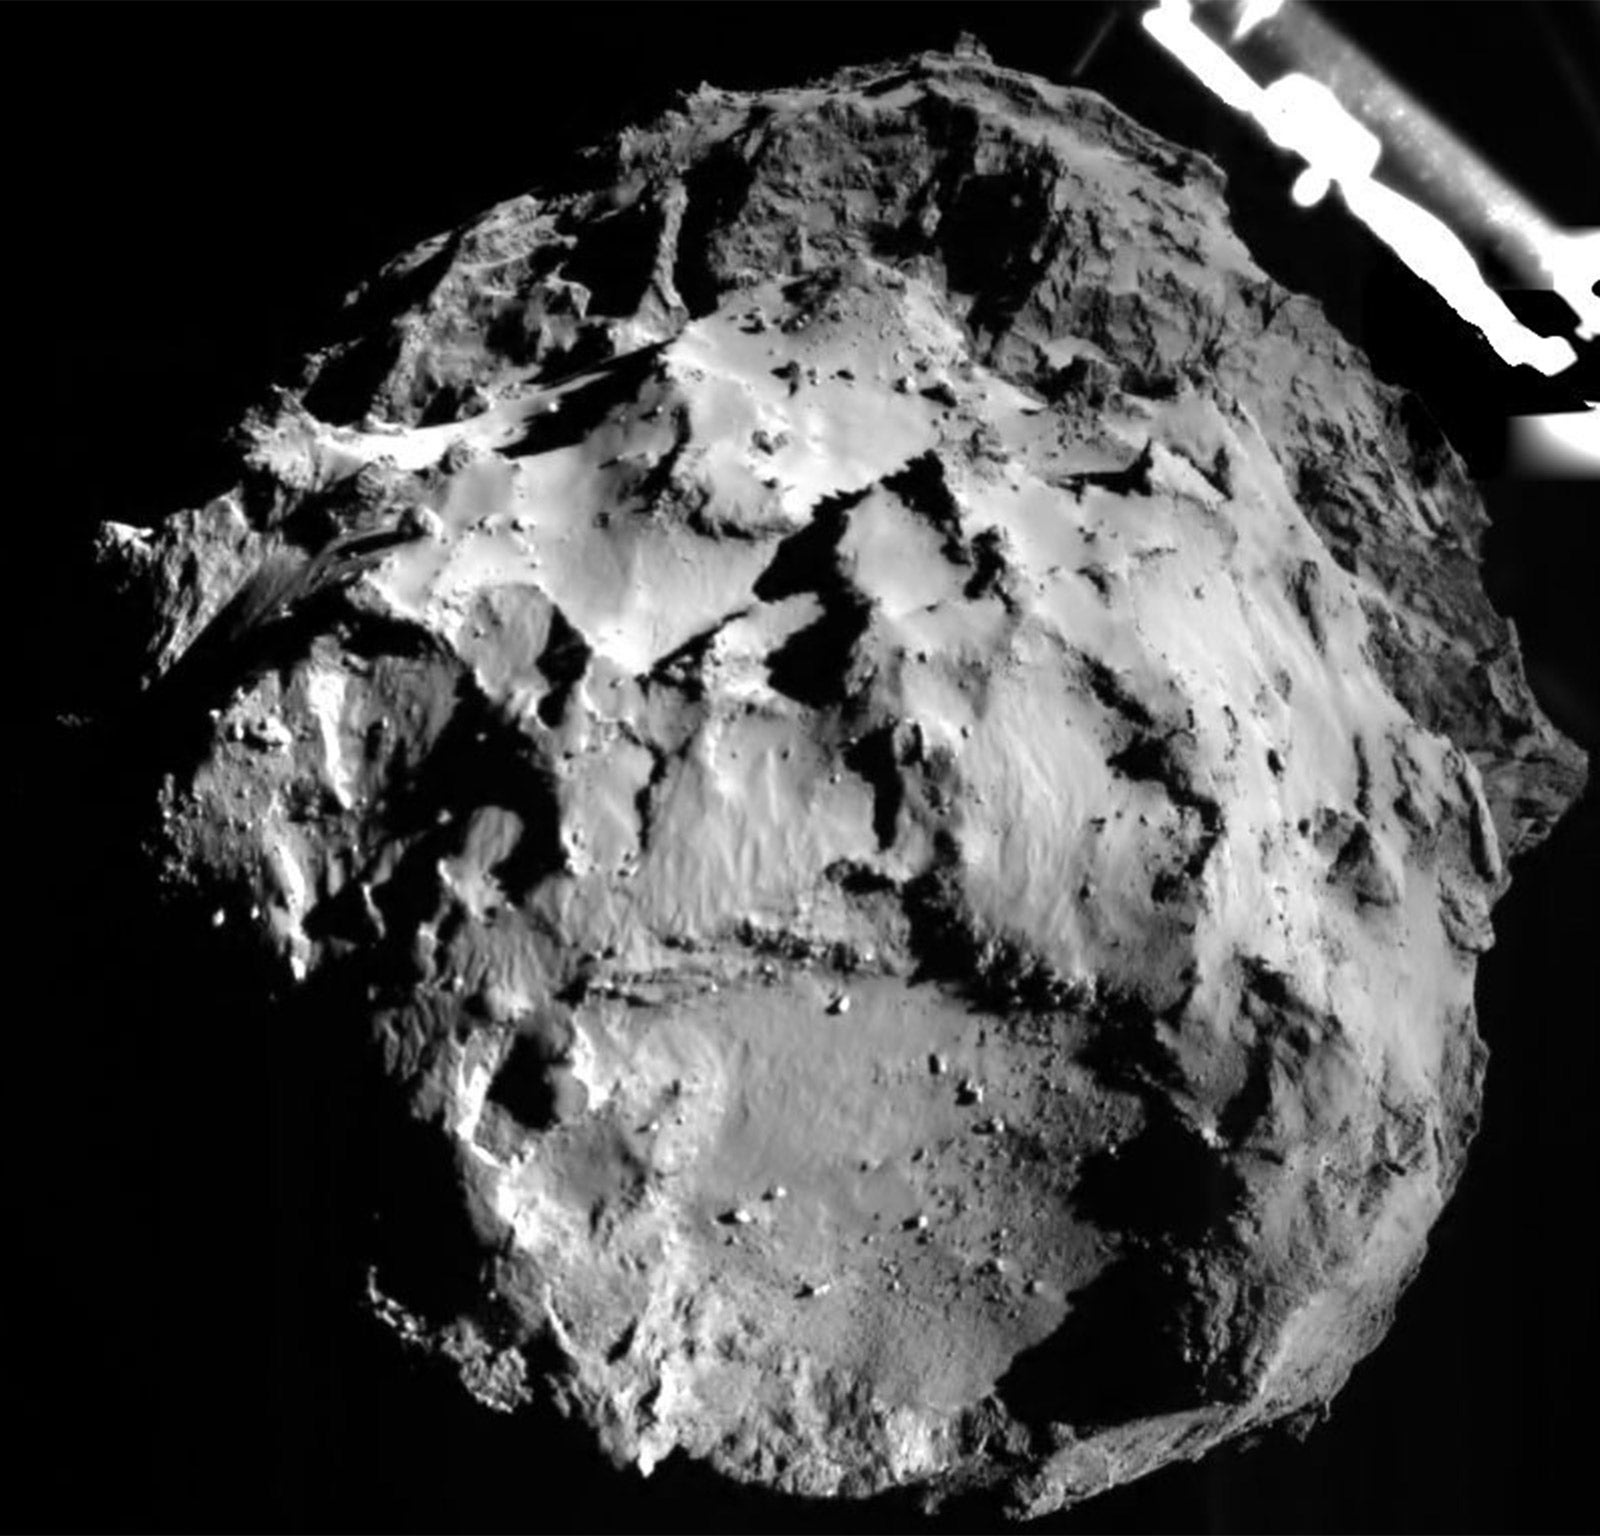 Image of Comet 67P/CG taken by the Philae lander from a distance of approximately 3km from the surface